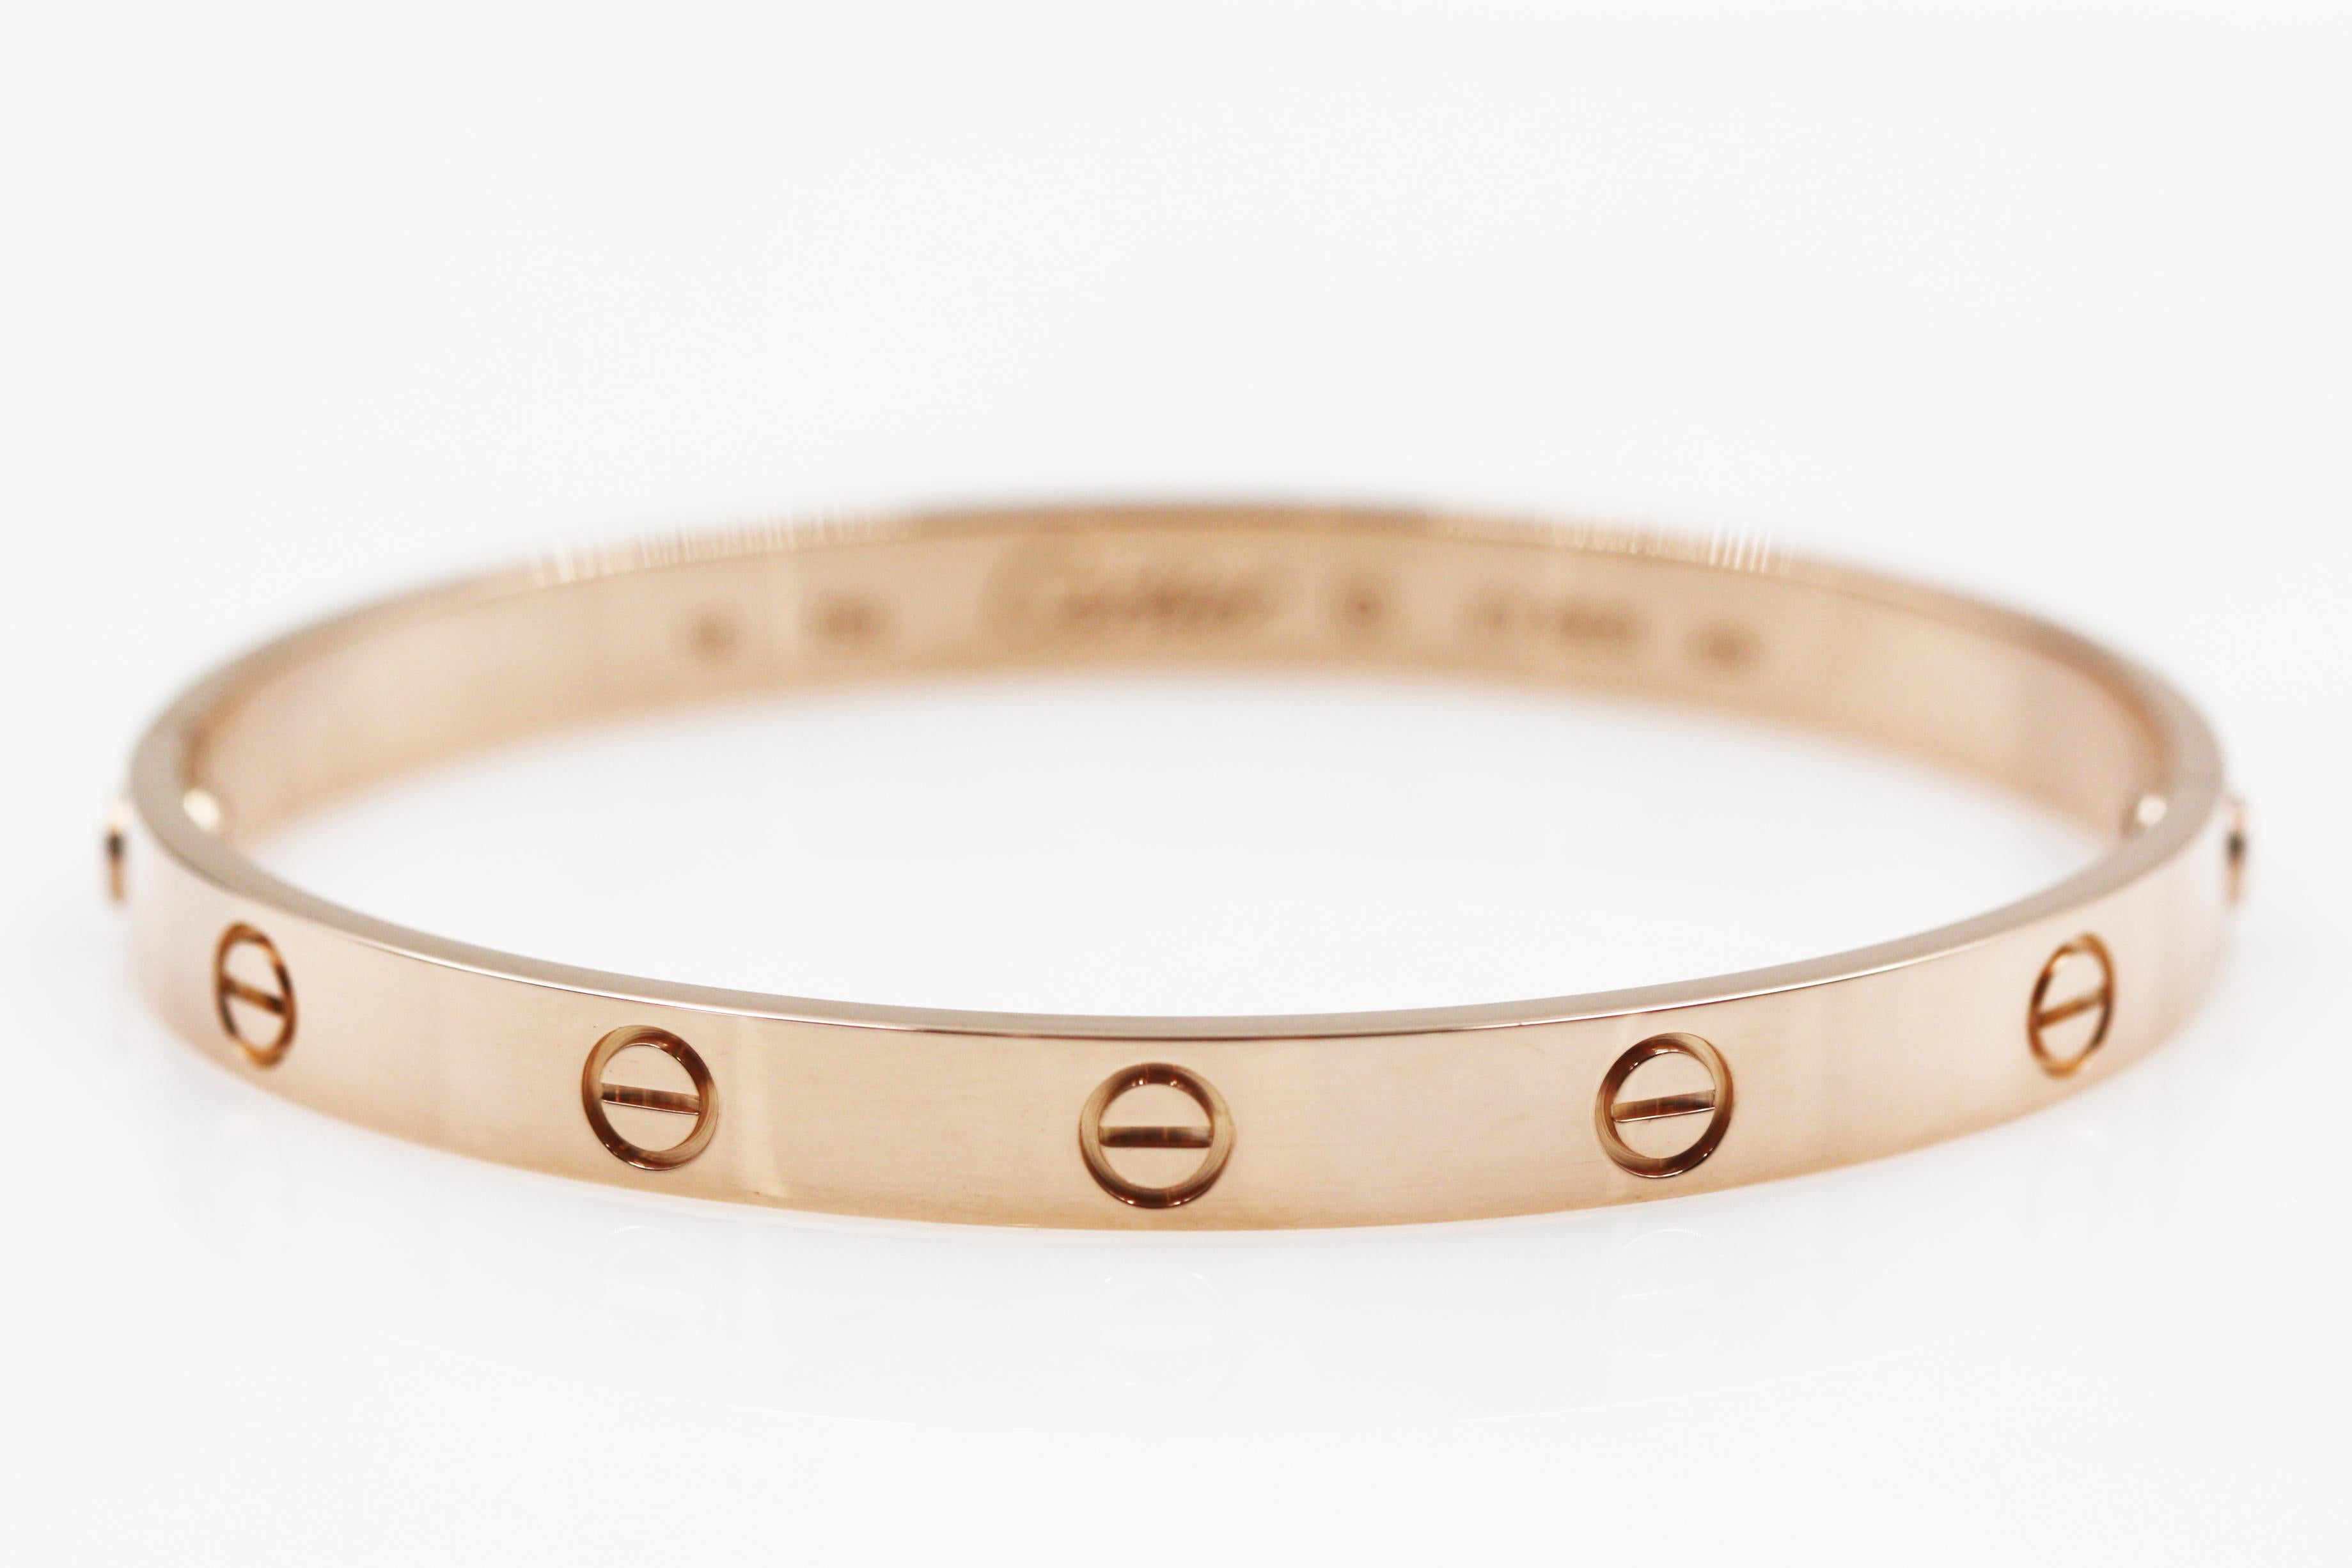 A Beautiful bracelet from Cartier Love collection, made in 18K rose gold. The bracelet have the iconic screw motif. REF: B6035617

Size 20
We have other size available, please feel free to ask.
This item will come with an original box and